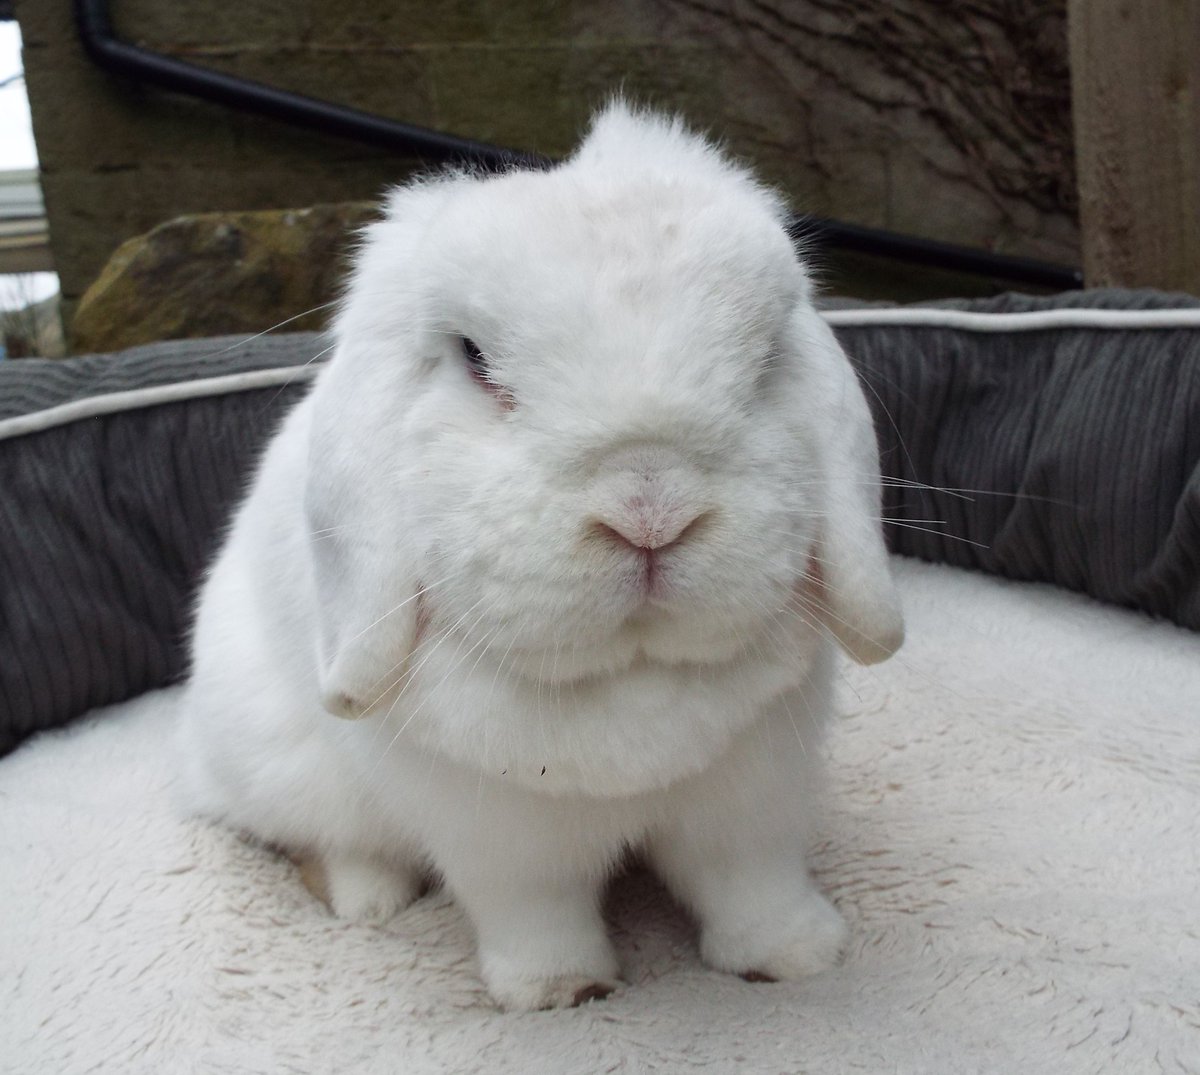 Aurora who arrived recently has quite a few issues, hearing problems, runny eyes & she's had to have dental treatment for overgrown molars. We will be looking for a foster home for her soon so she can have a home & we will provide the vet care when needed.🐰🩺 #rabbits #bunnies